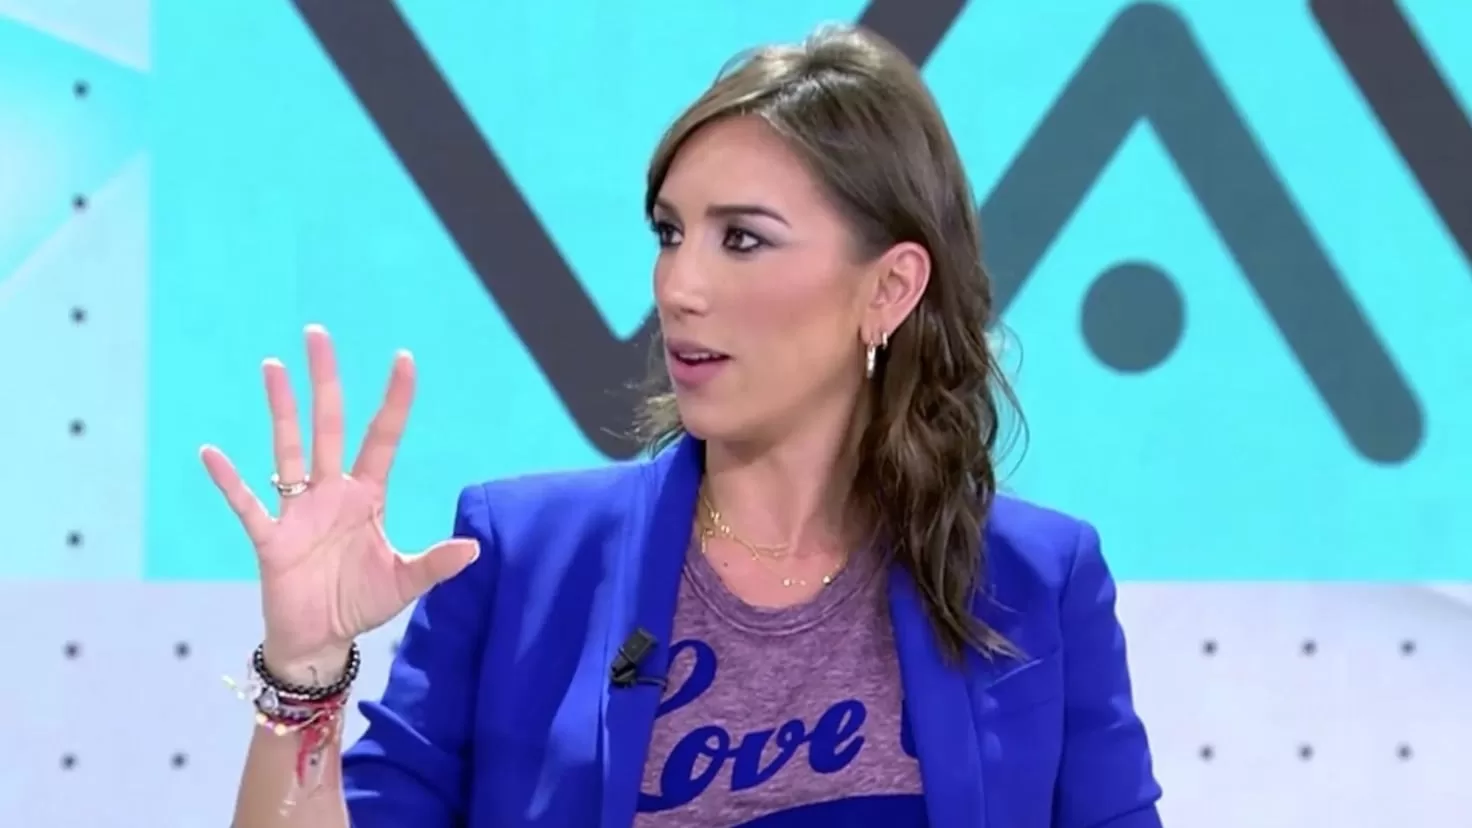 Patricia Pardo charges against Mediaset after the signing of the presenter created with AI: I feel threatened
